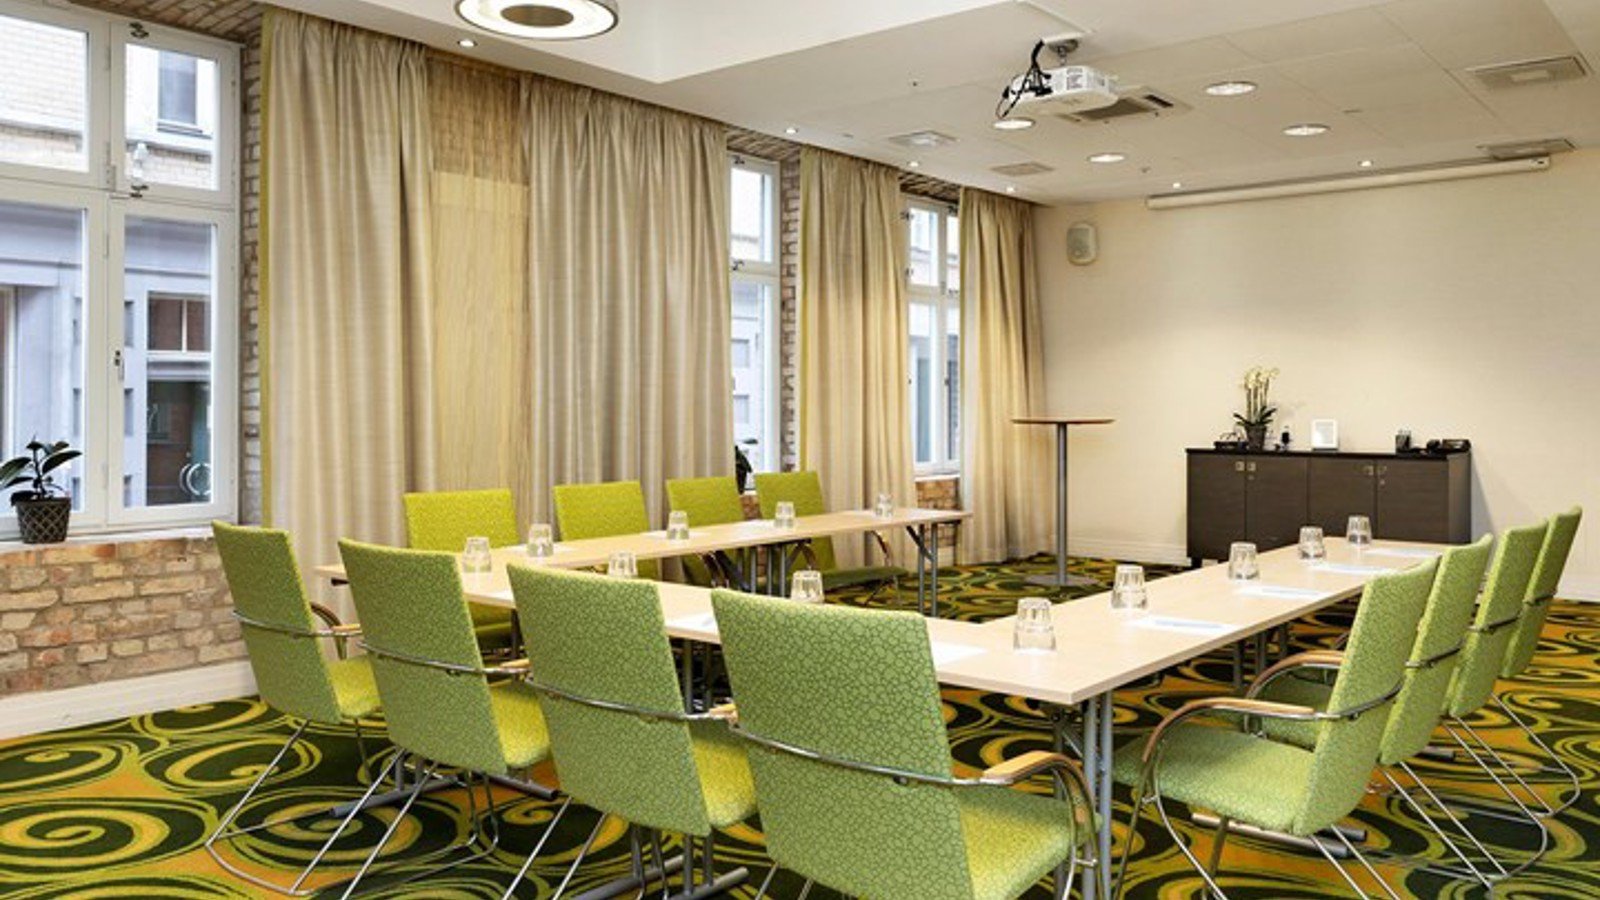 Conference room with green chairs, green patterned carpet and large windows